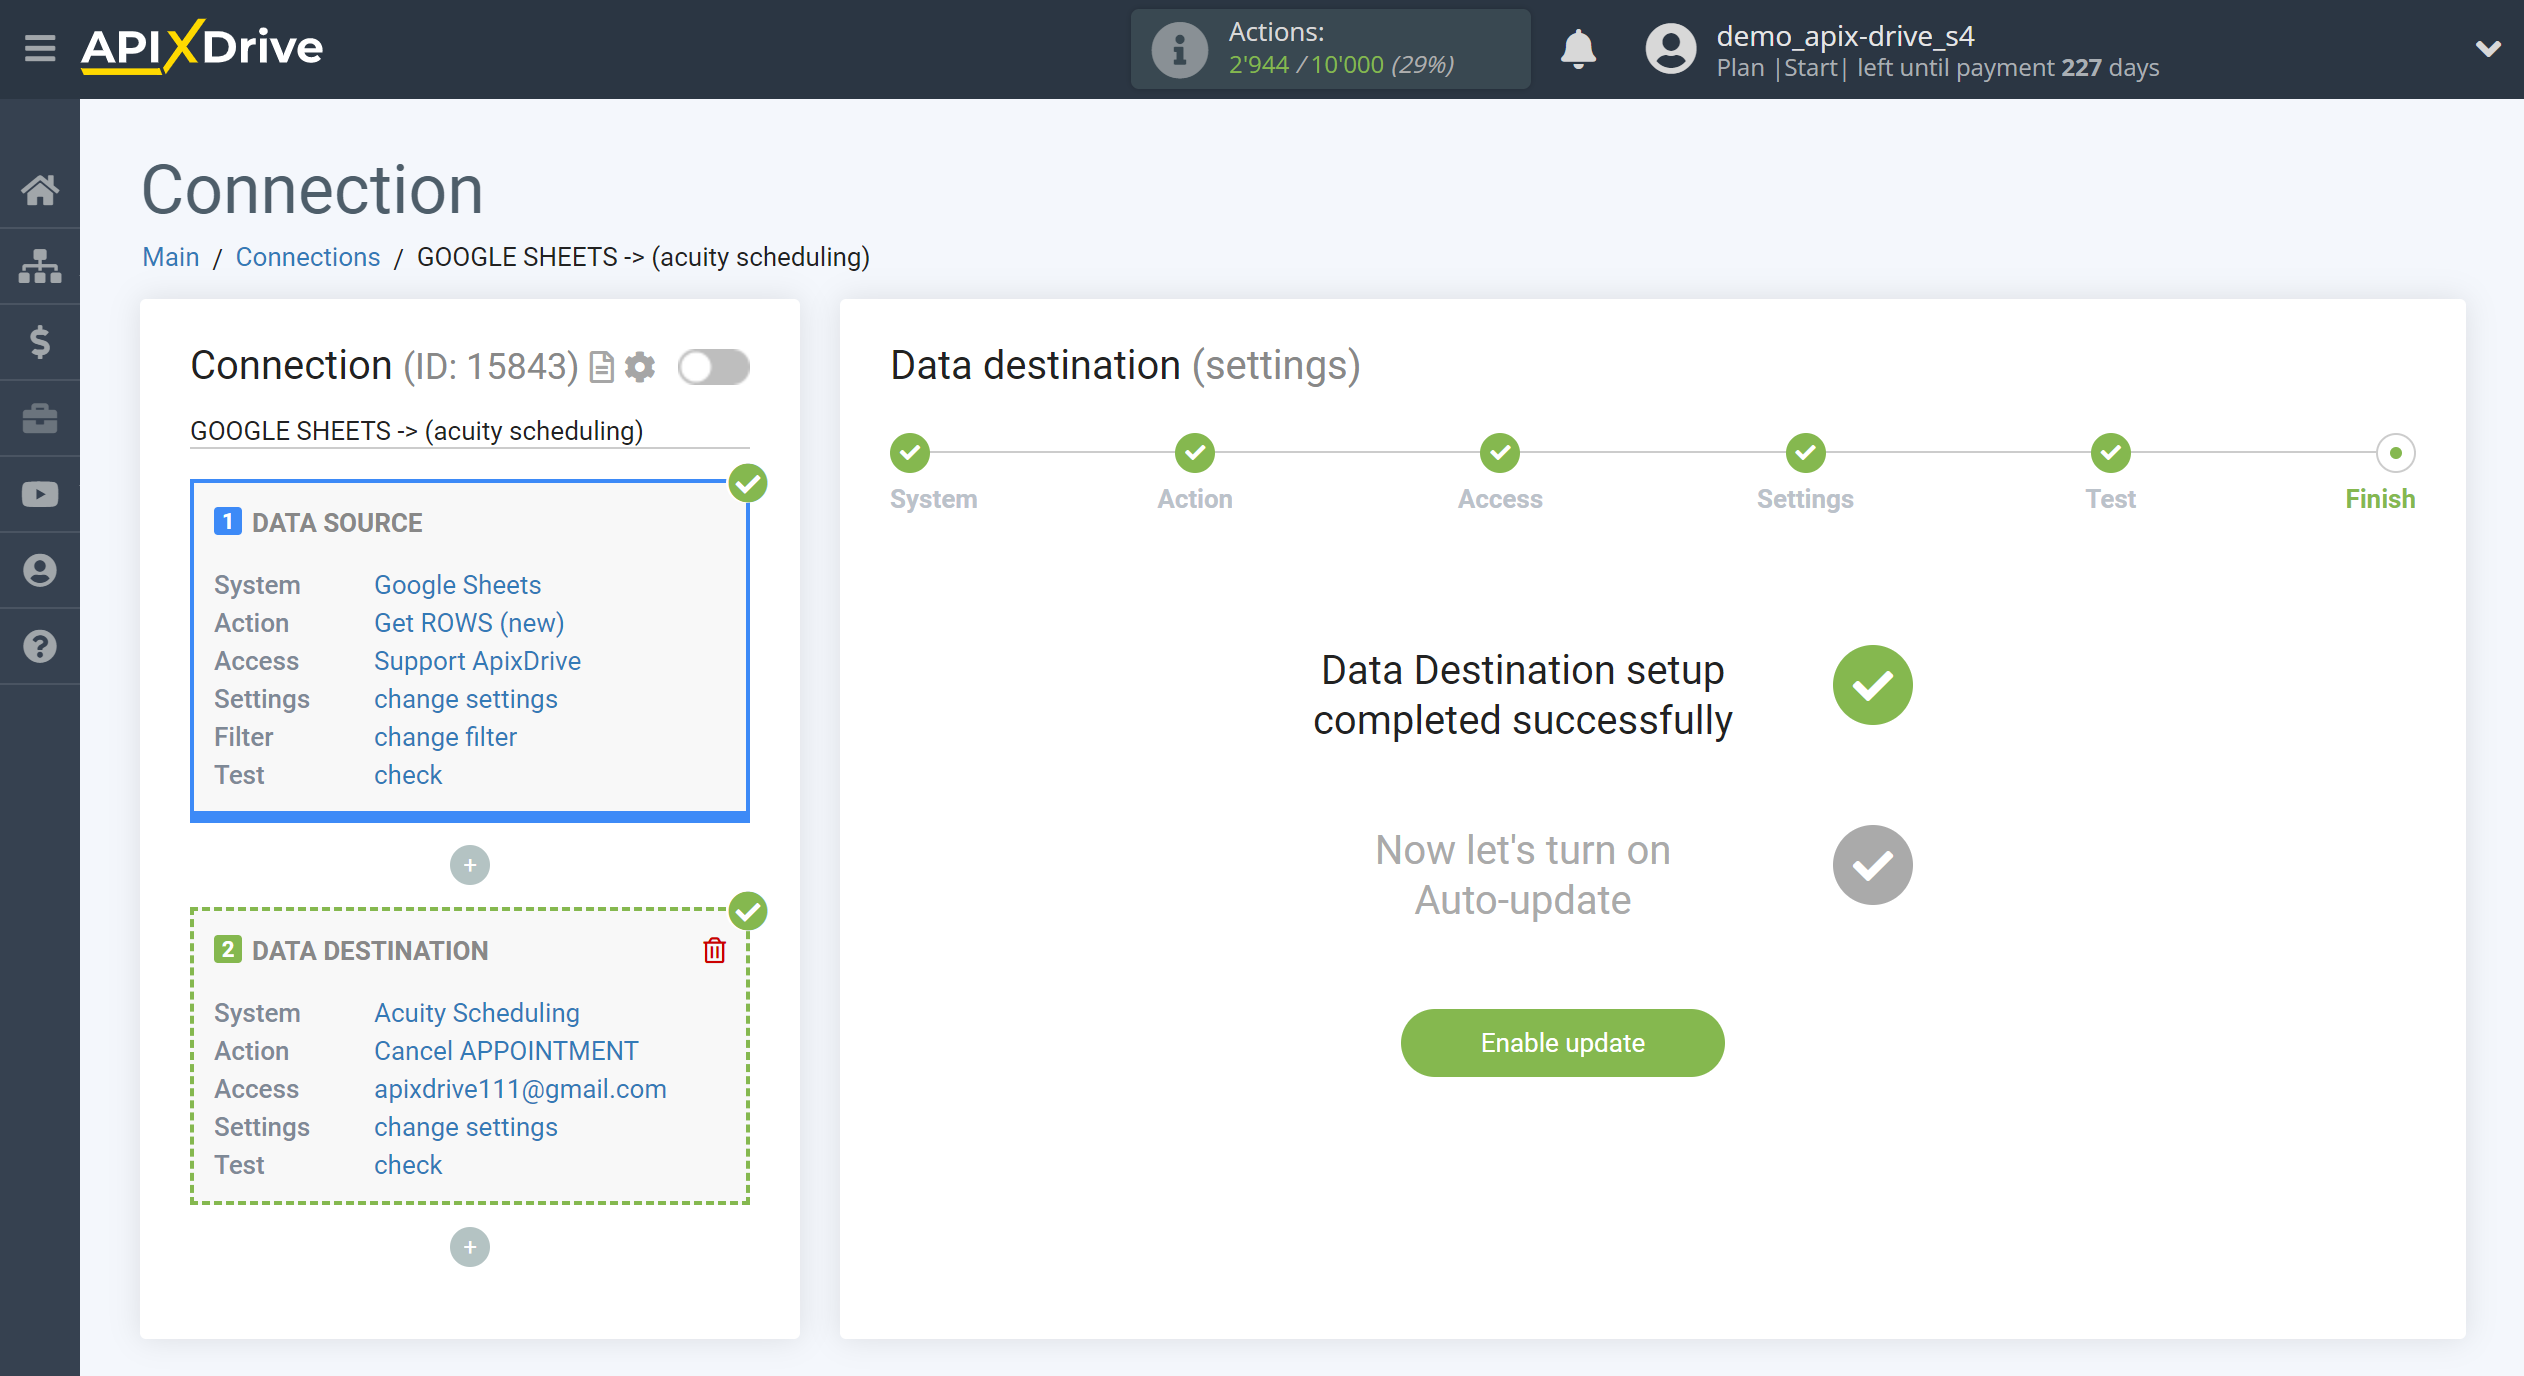 How to Connect Acuity Scheduling as Data Destination | Enable auto-update